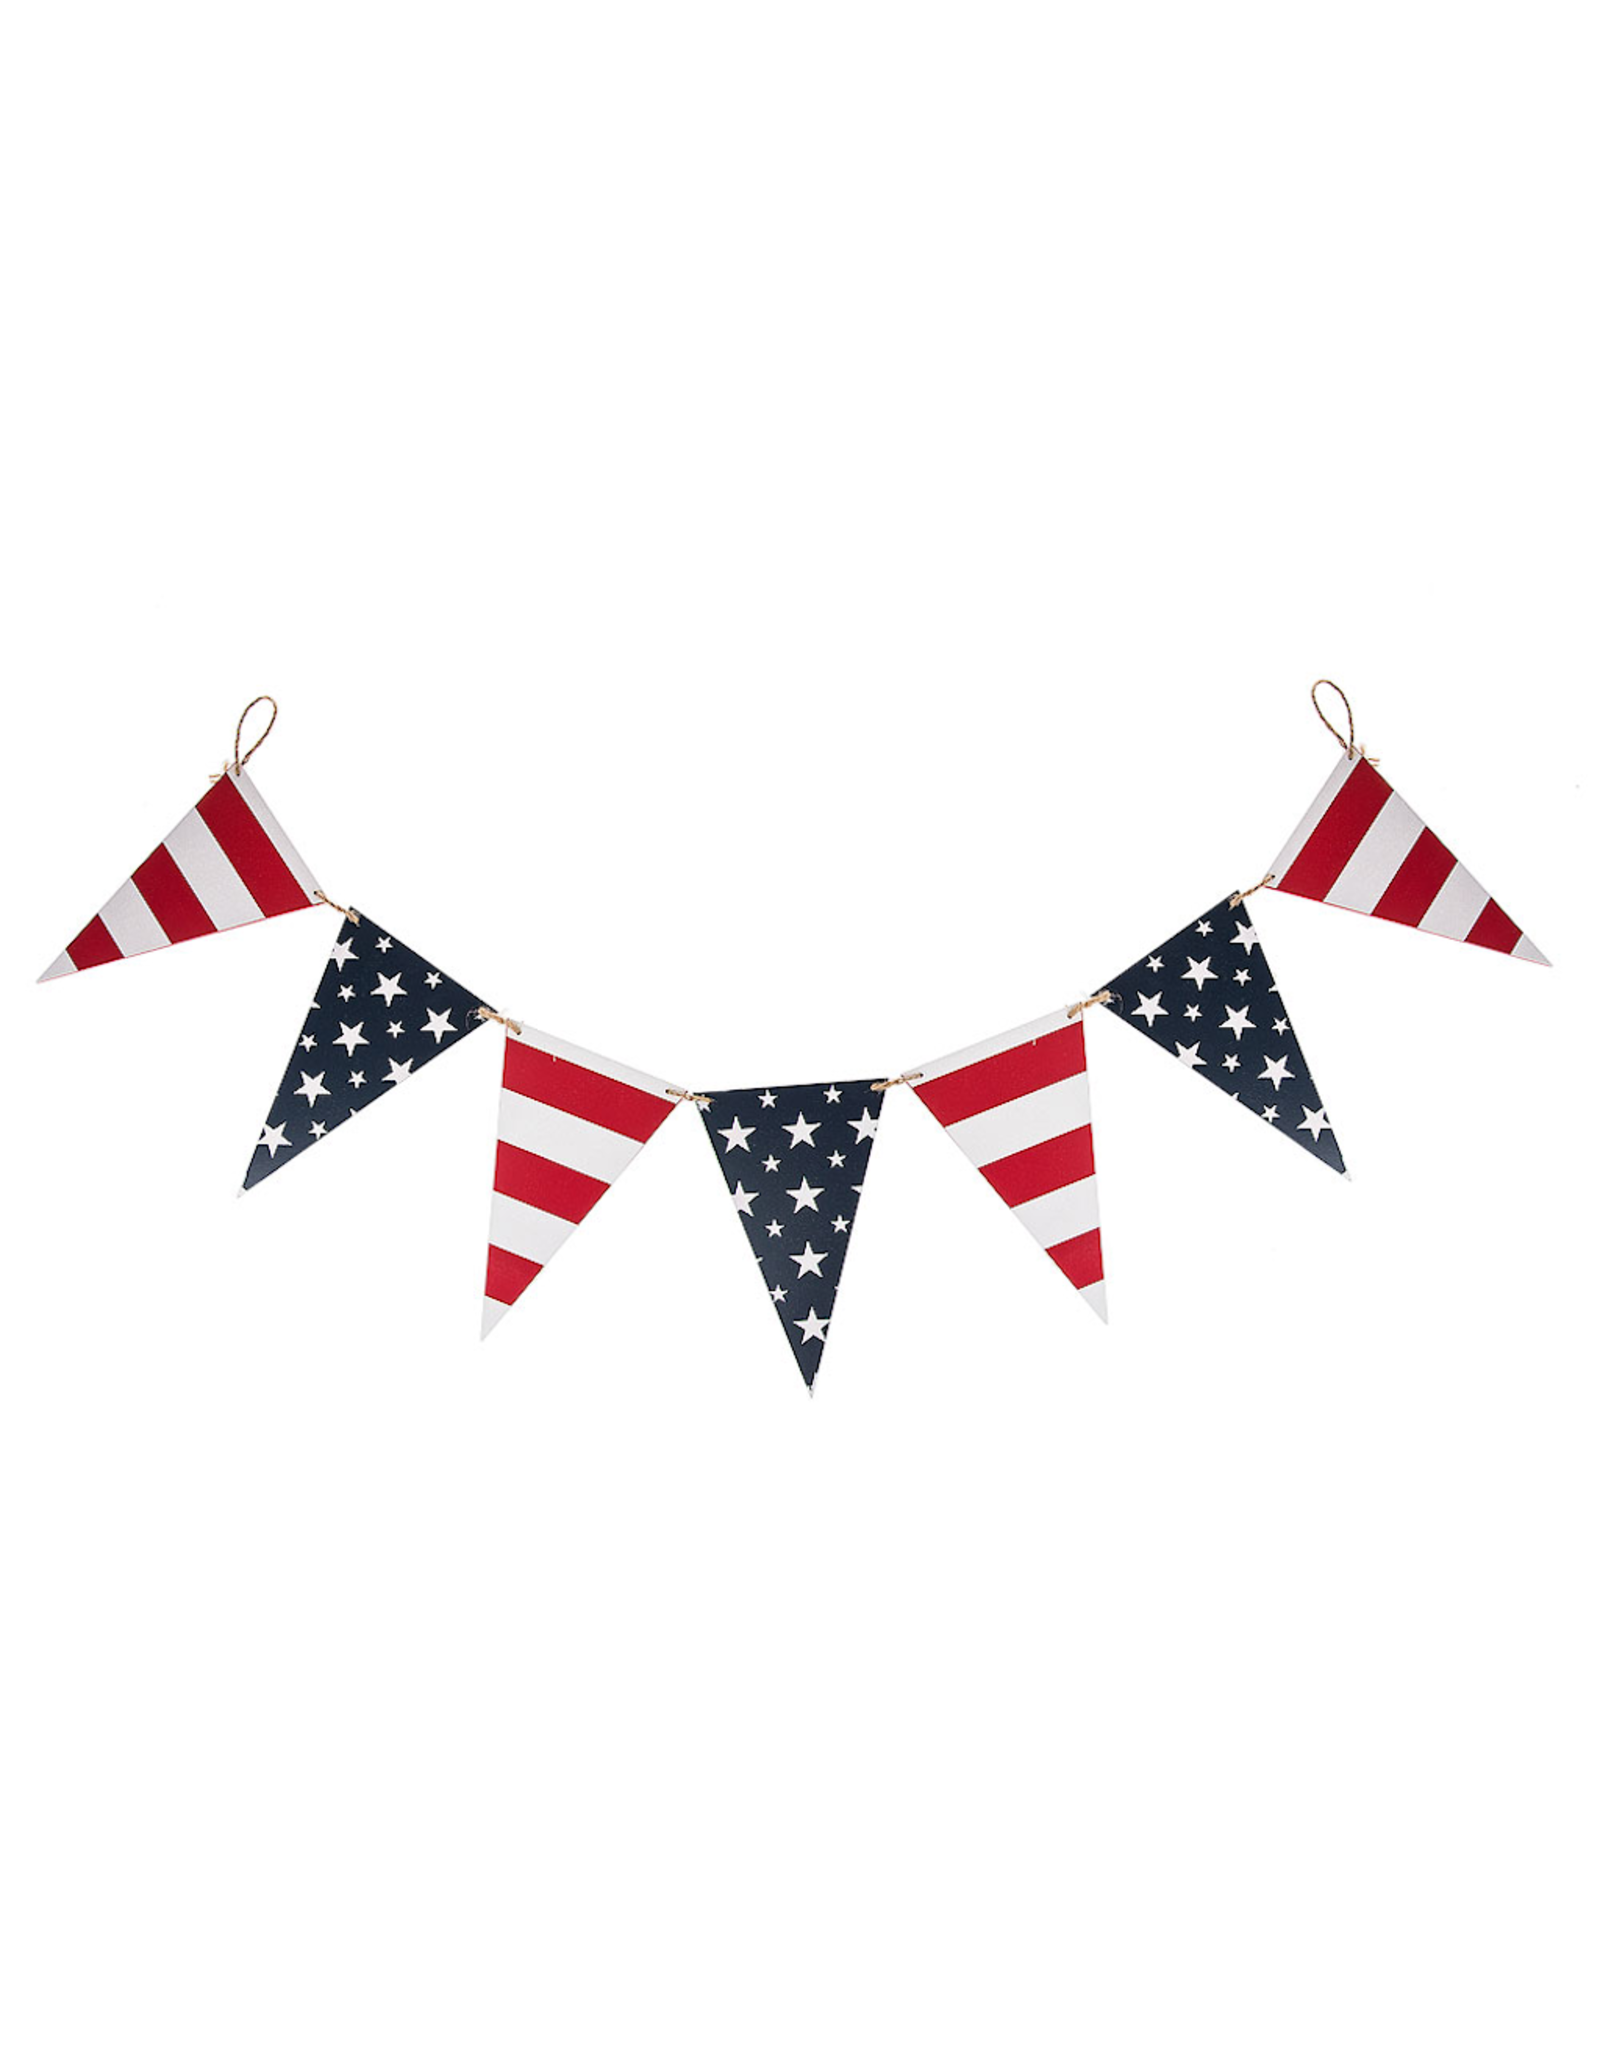 Midwest-CBK Patriotic Banner Red White Blue Stars and Stripes Flag 42L